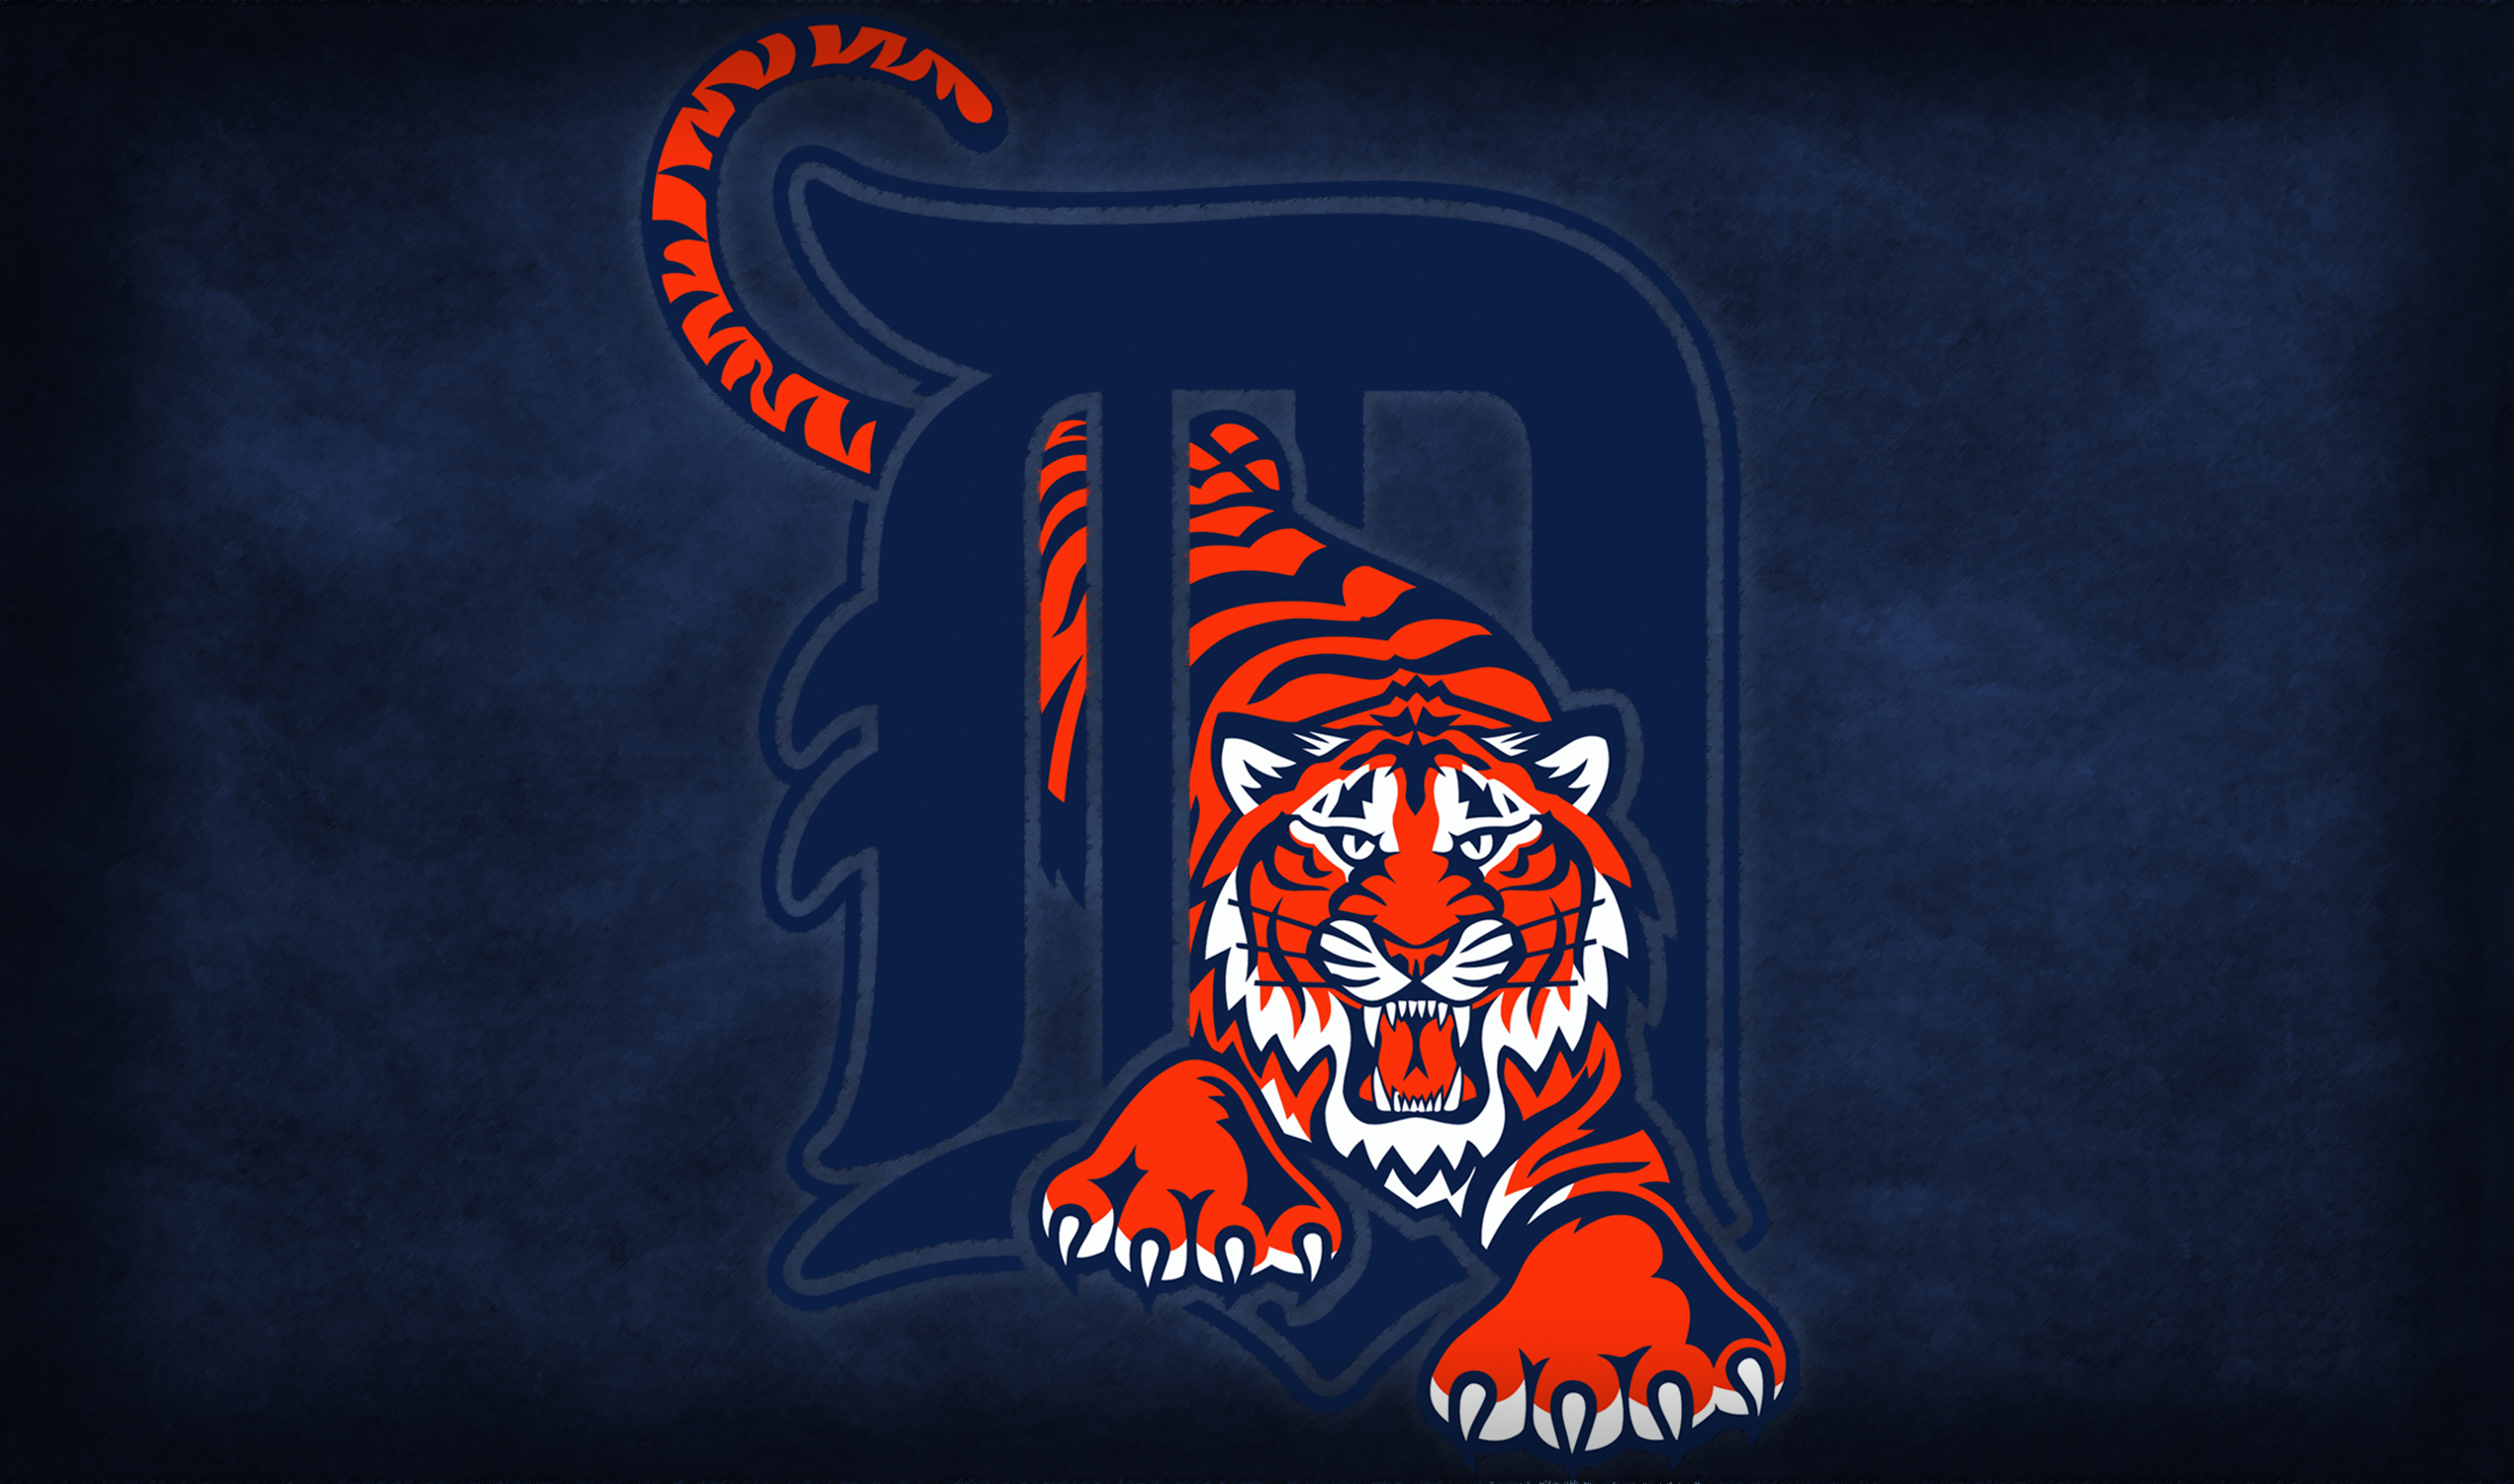 Detroit Tigers by Kaito42 2540 x 1500